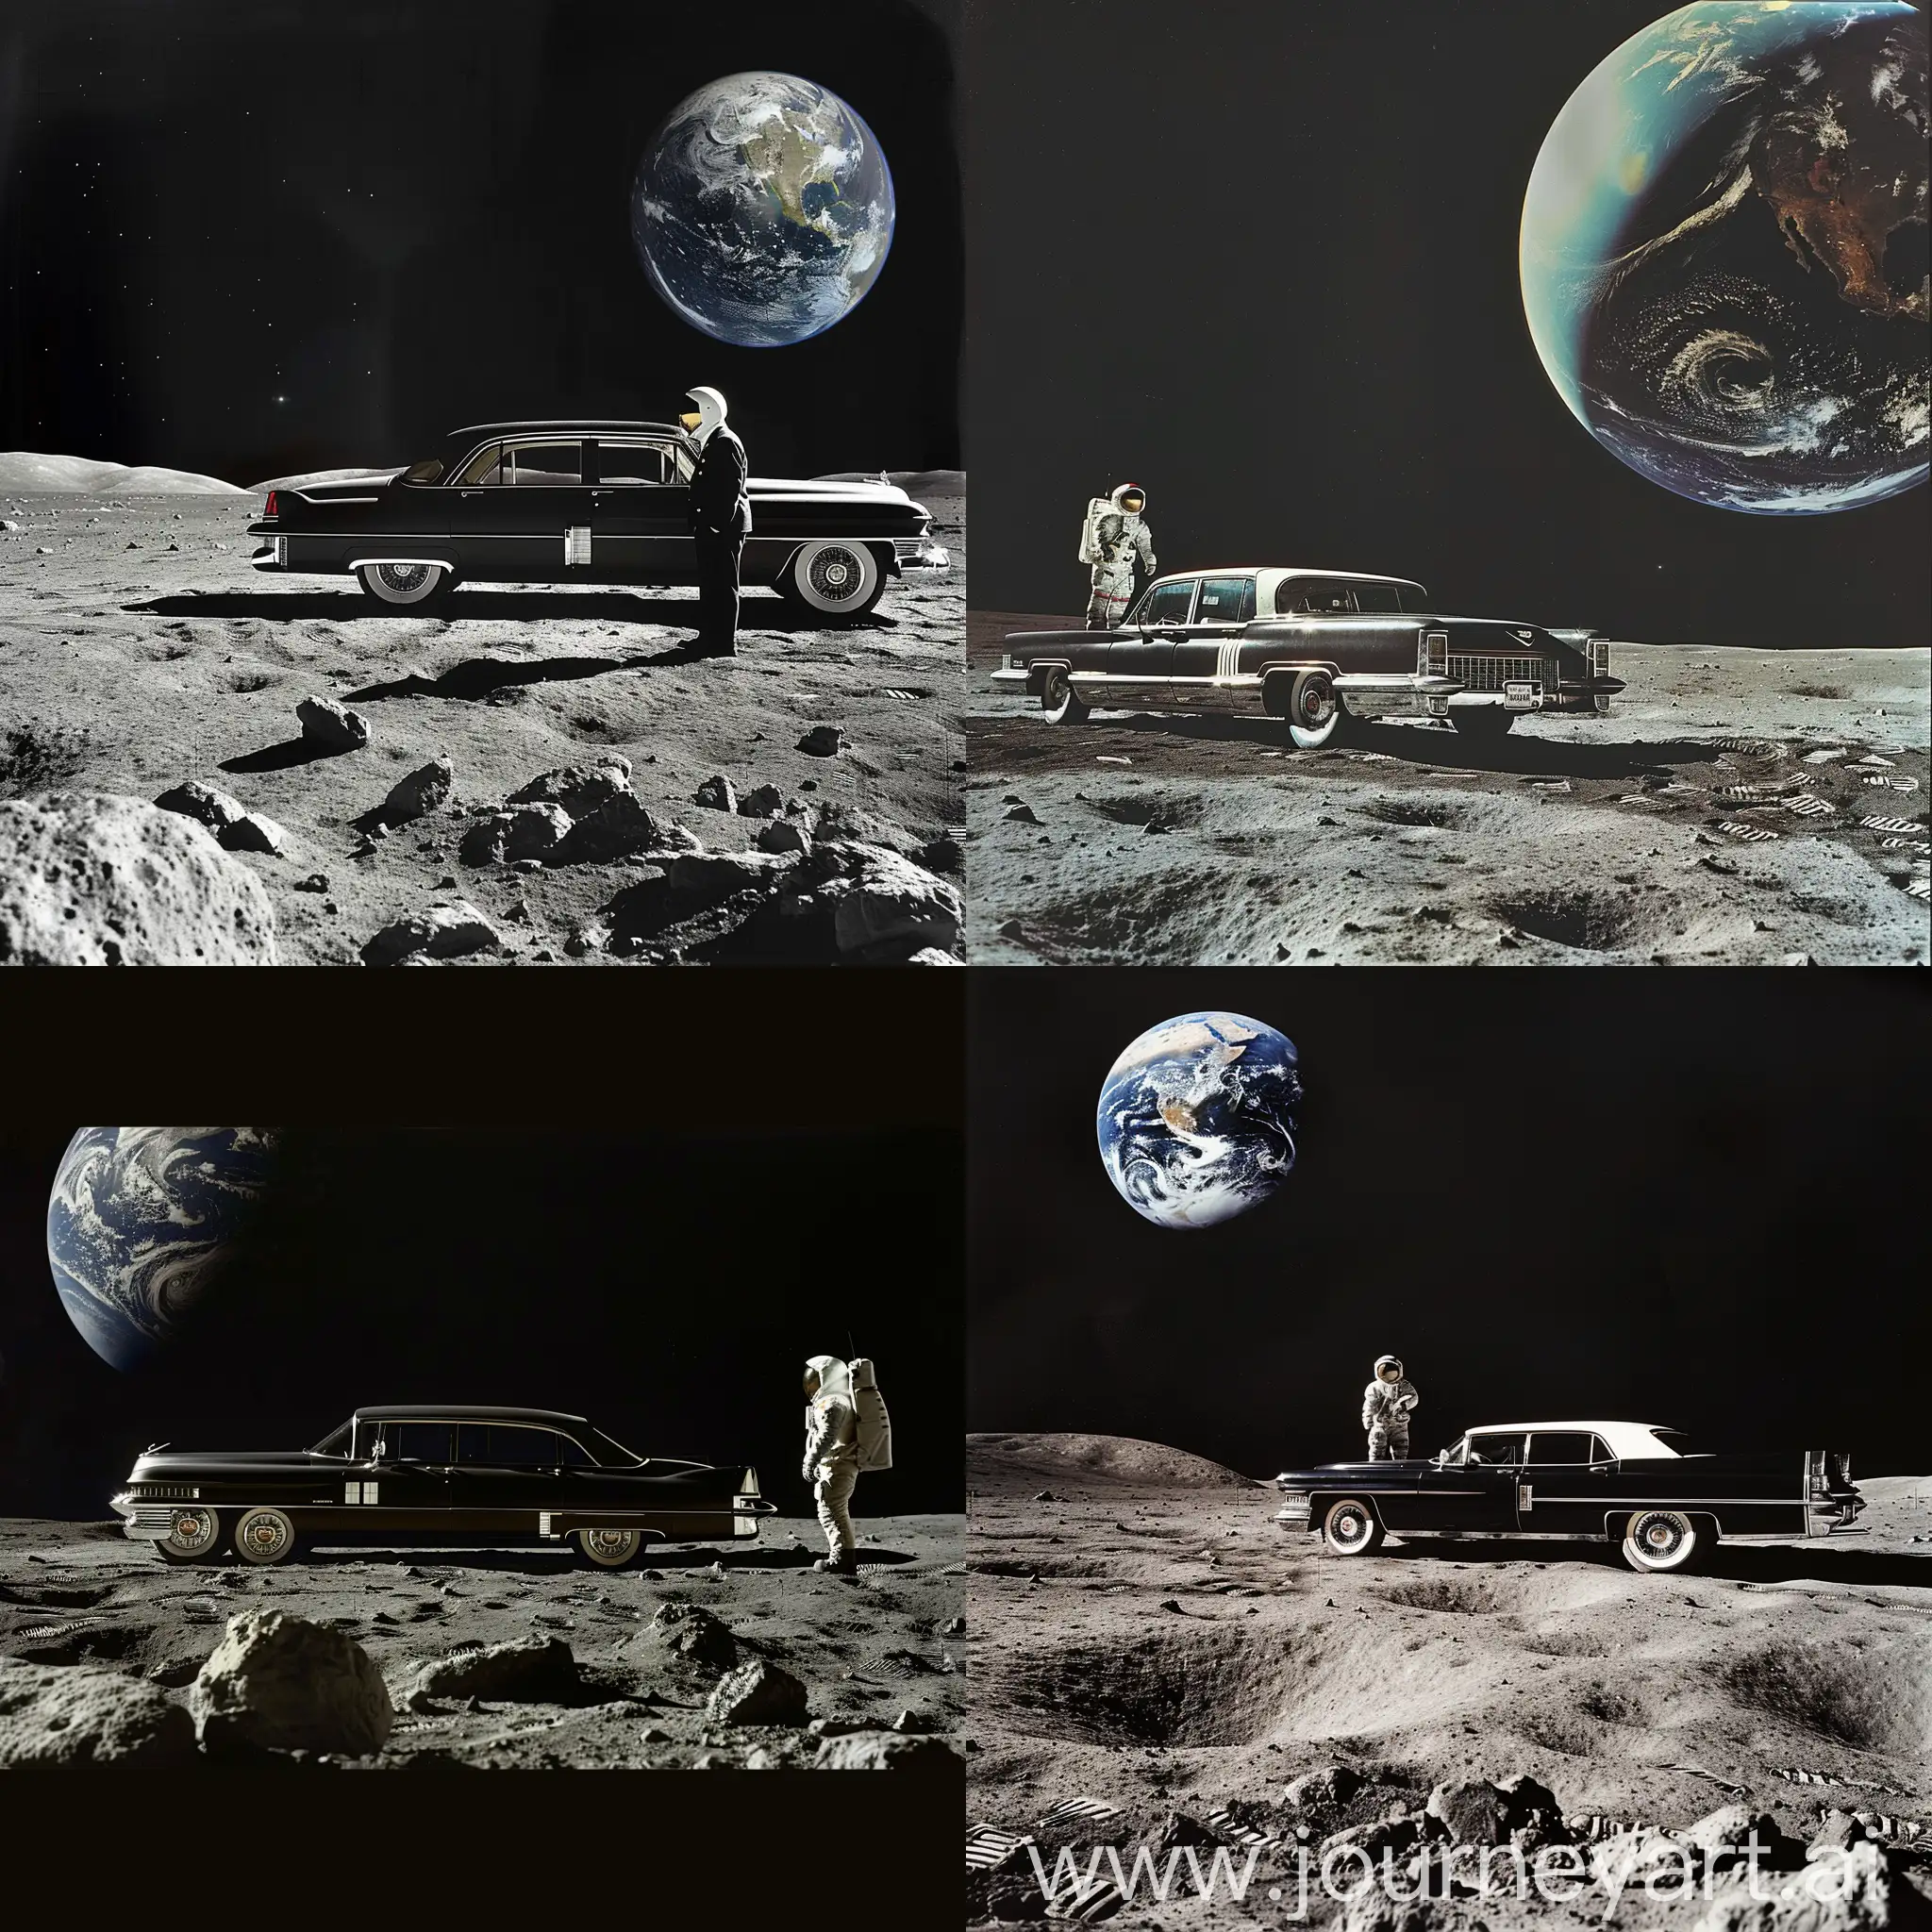 Lone-Astronaut-Contemplating-Earth-Beside-Vintage-Cadillac-Fleetwood-on-Moon-Surface